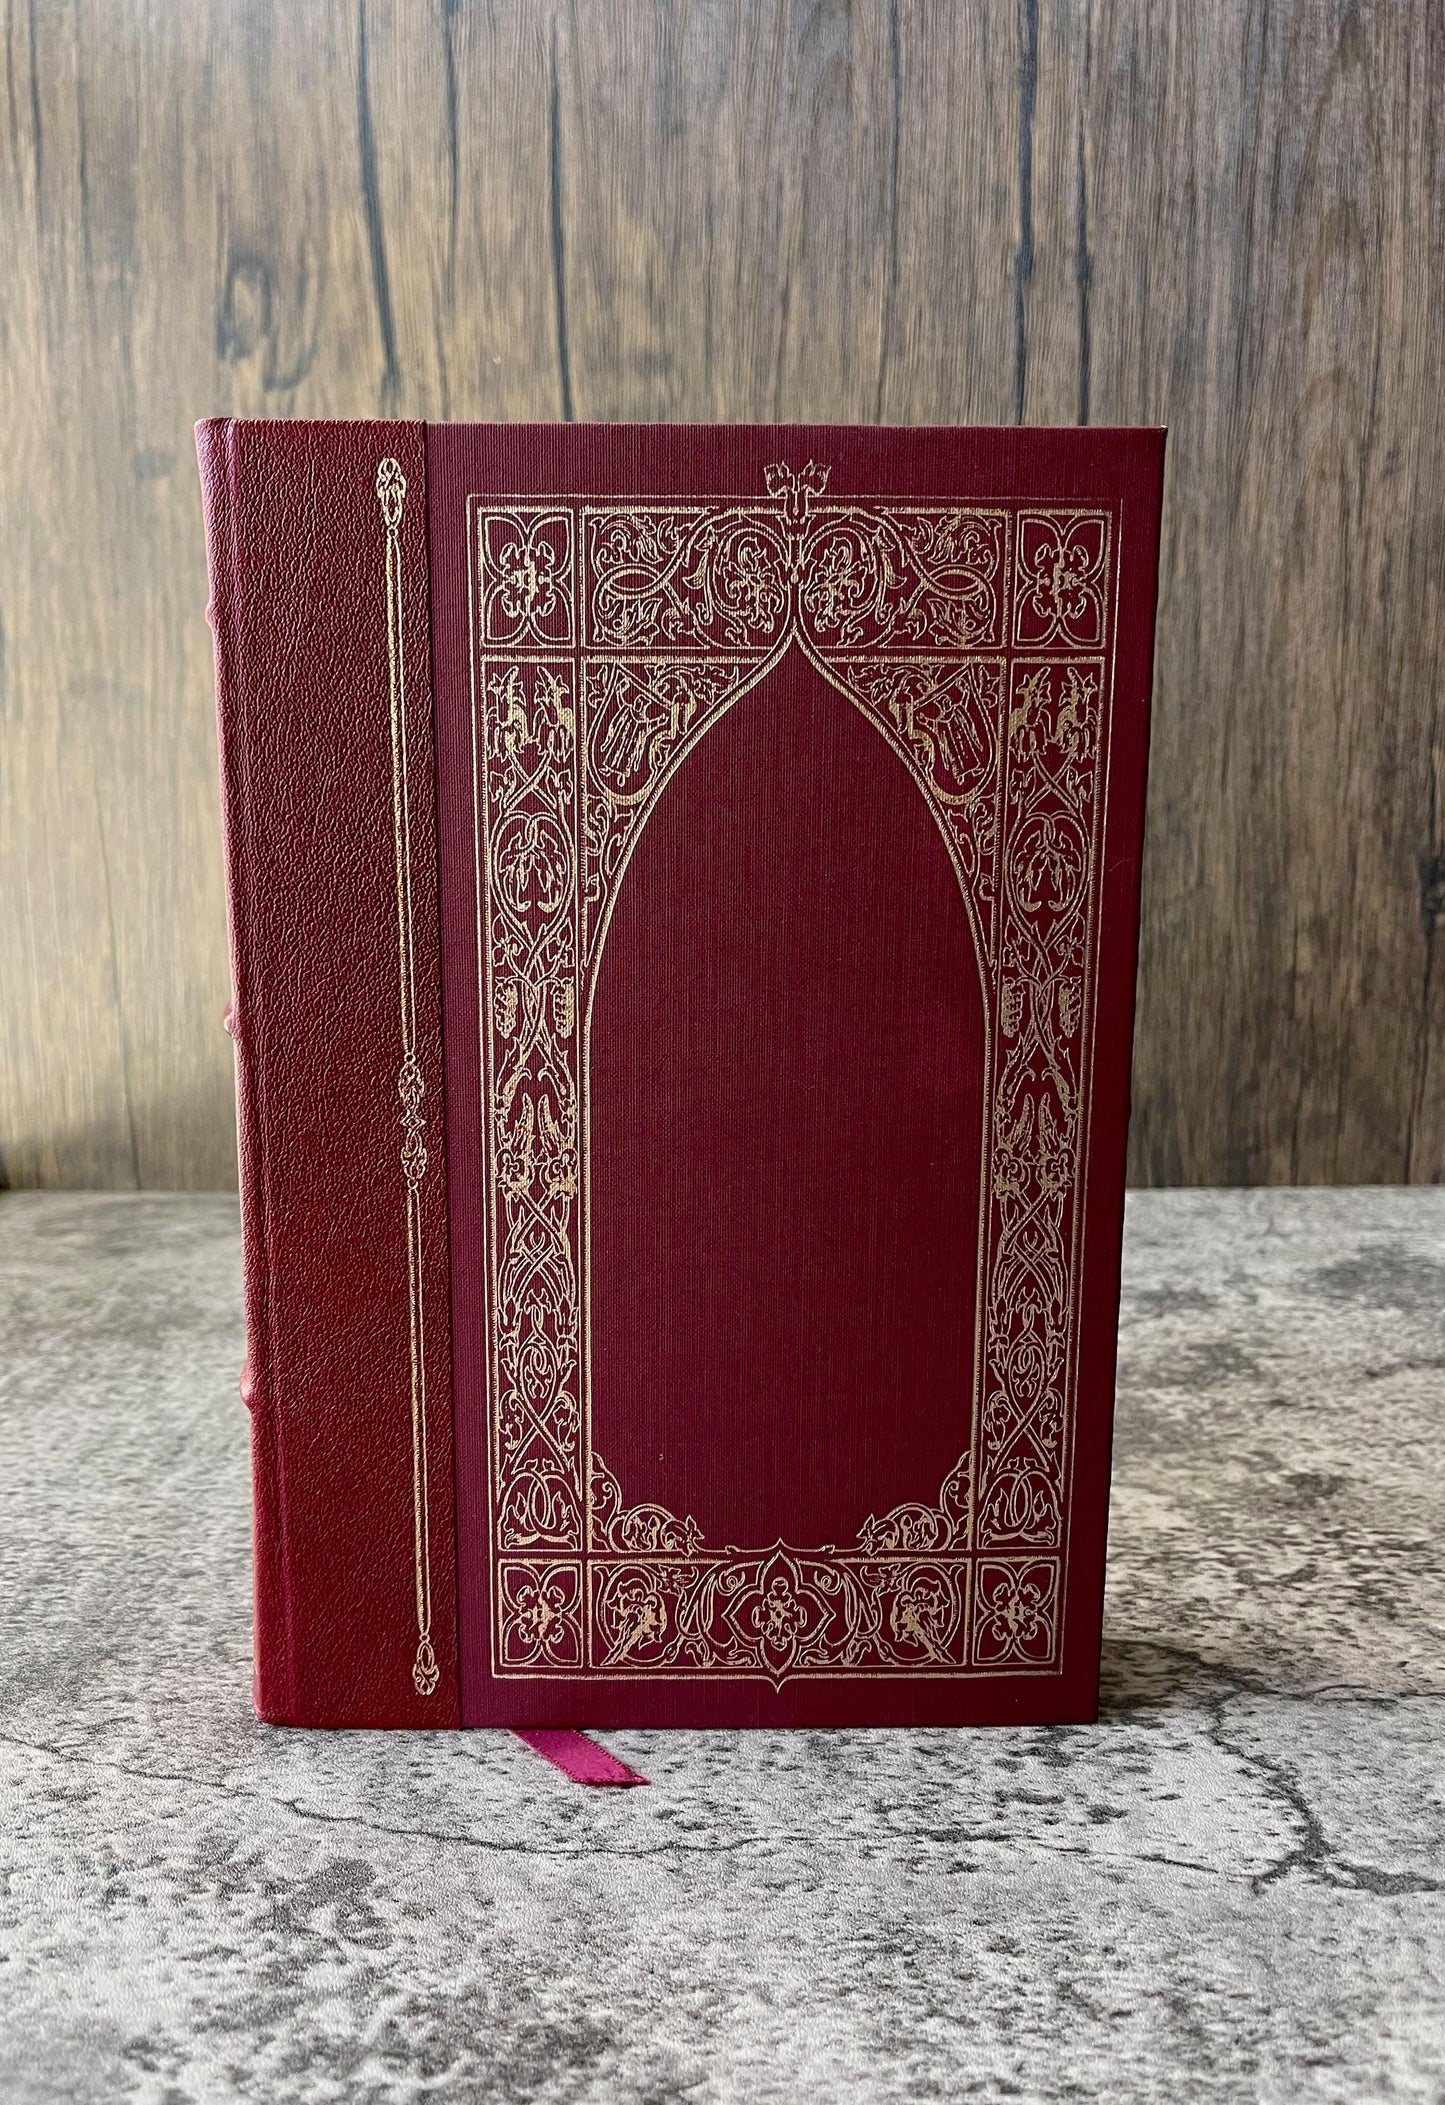 Faust / The Franklin Library / Quarter Bound Leather / 1981 - Precious Cache